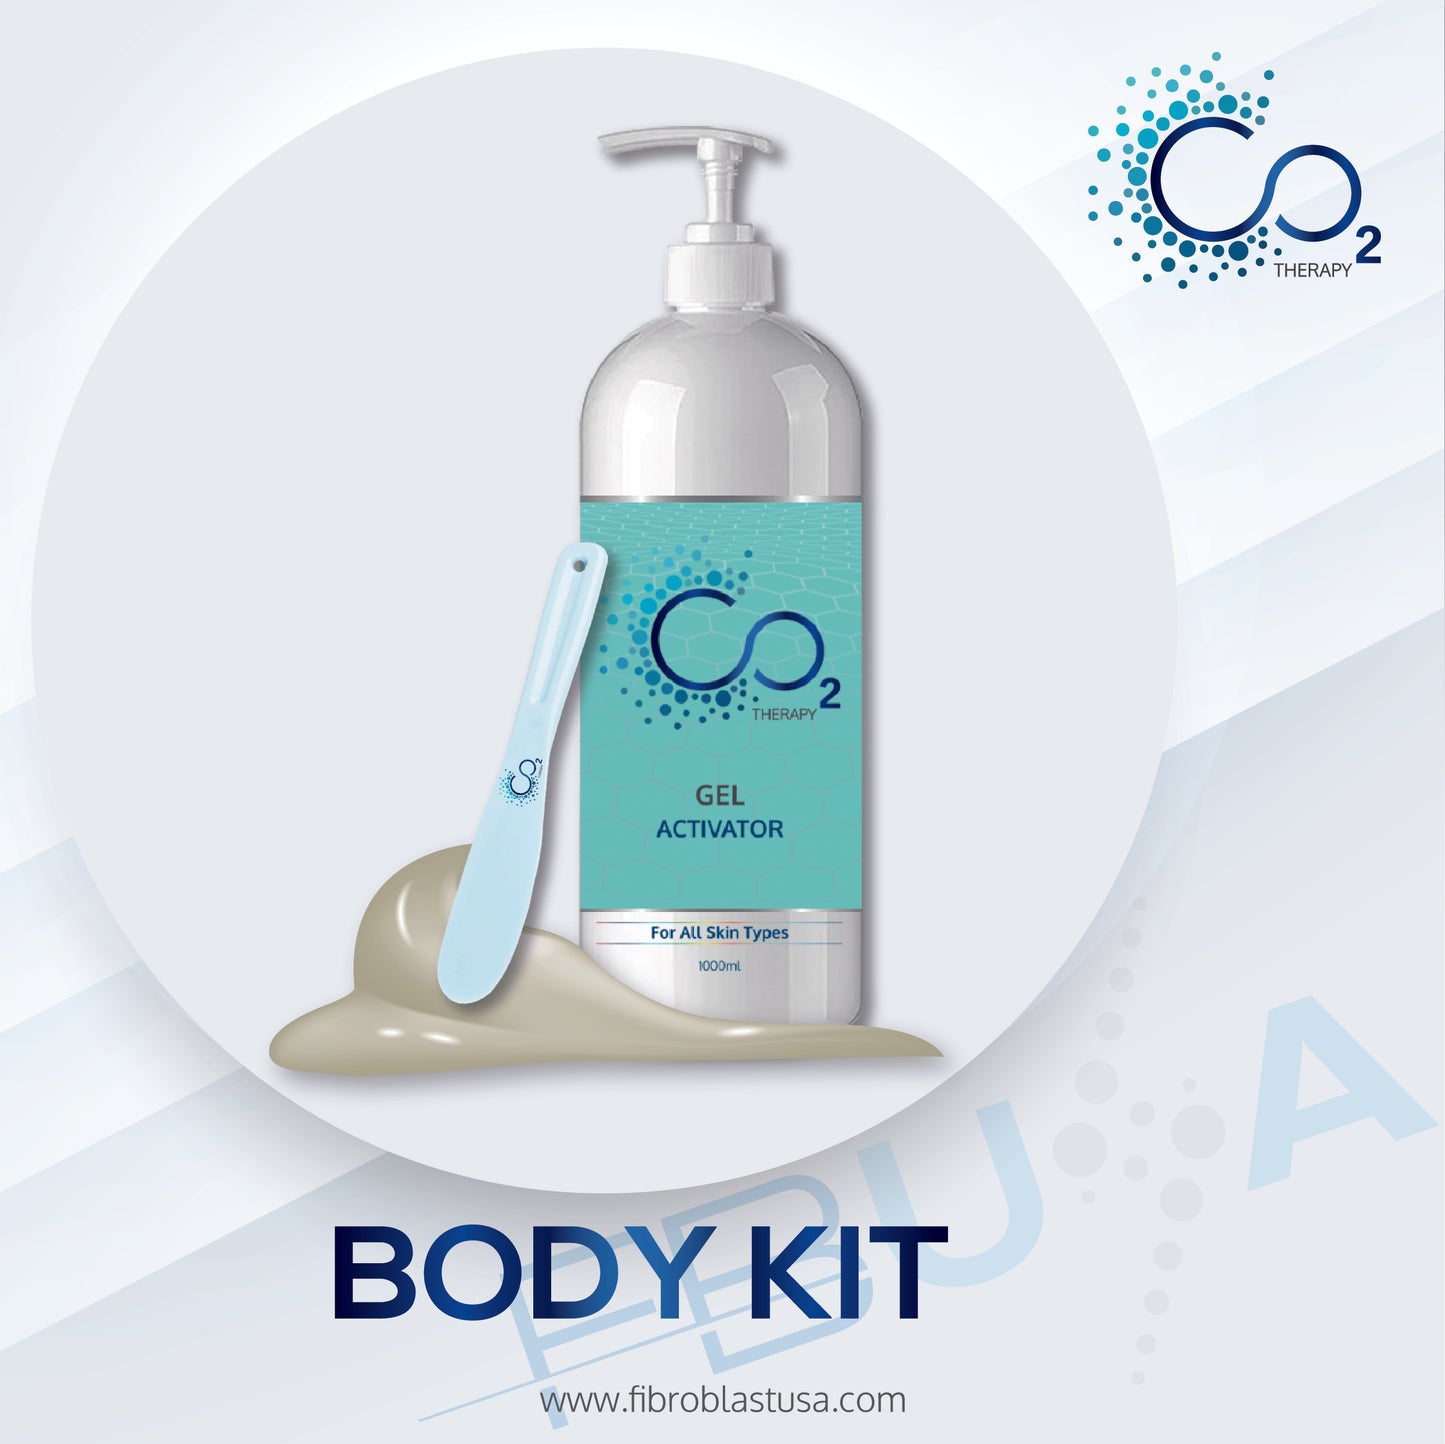 Co2 Carboxy Therapy Body Kit